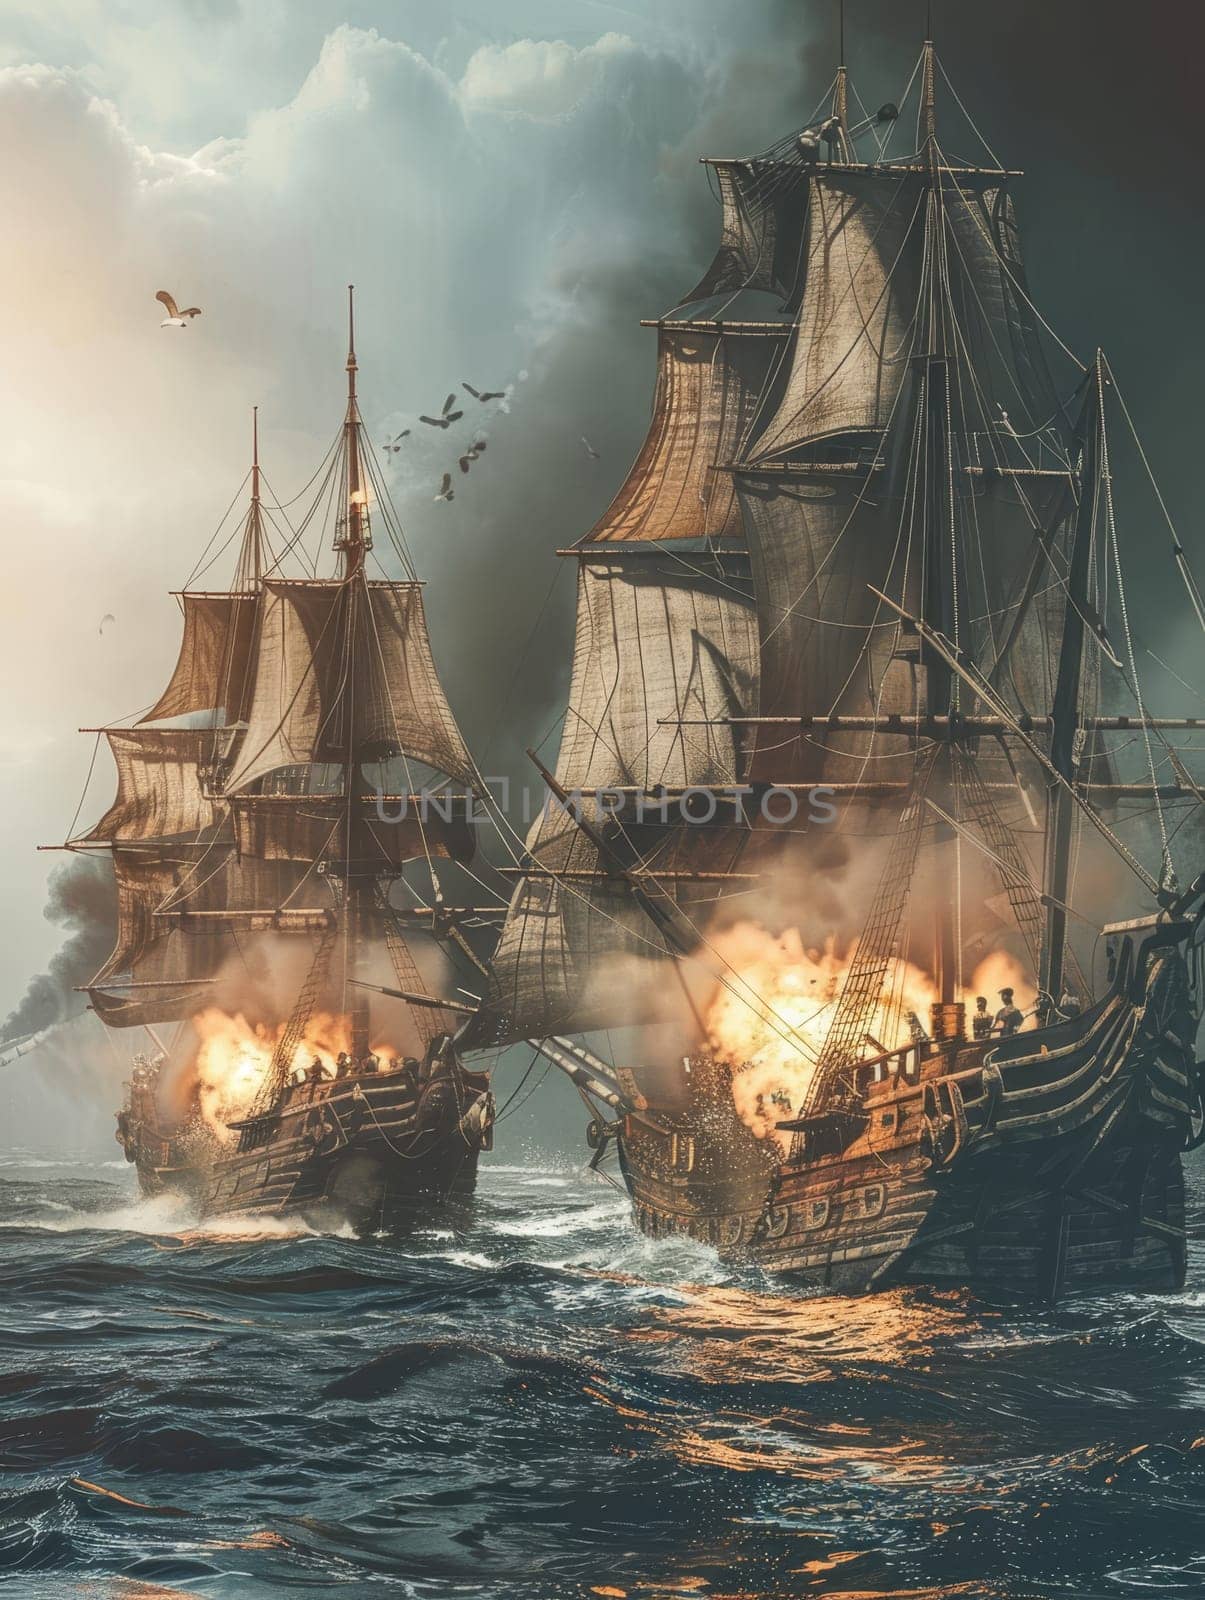 An epic naval battle scene featuring grand sailing ships amidst cannon fire and dramatic skies, invoking historical maritime warfare. by sfinks